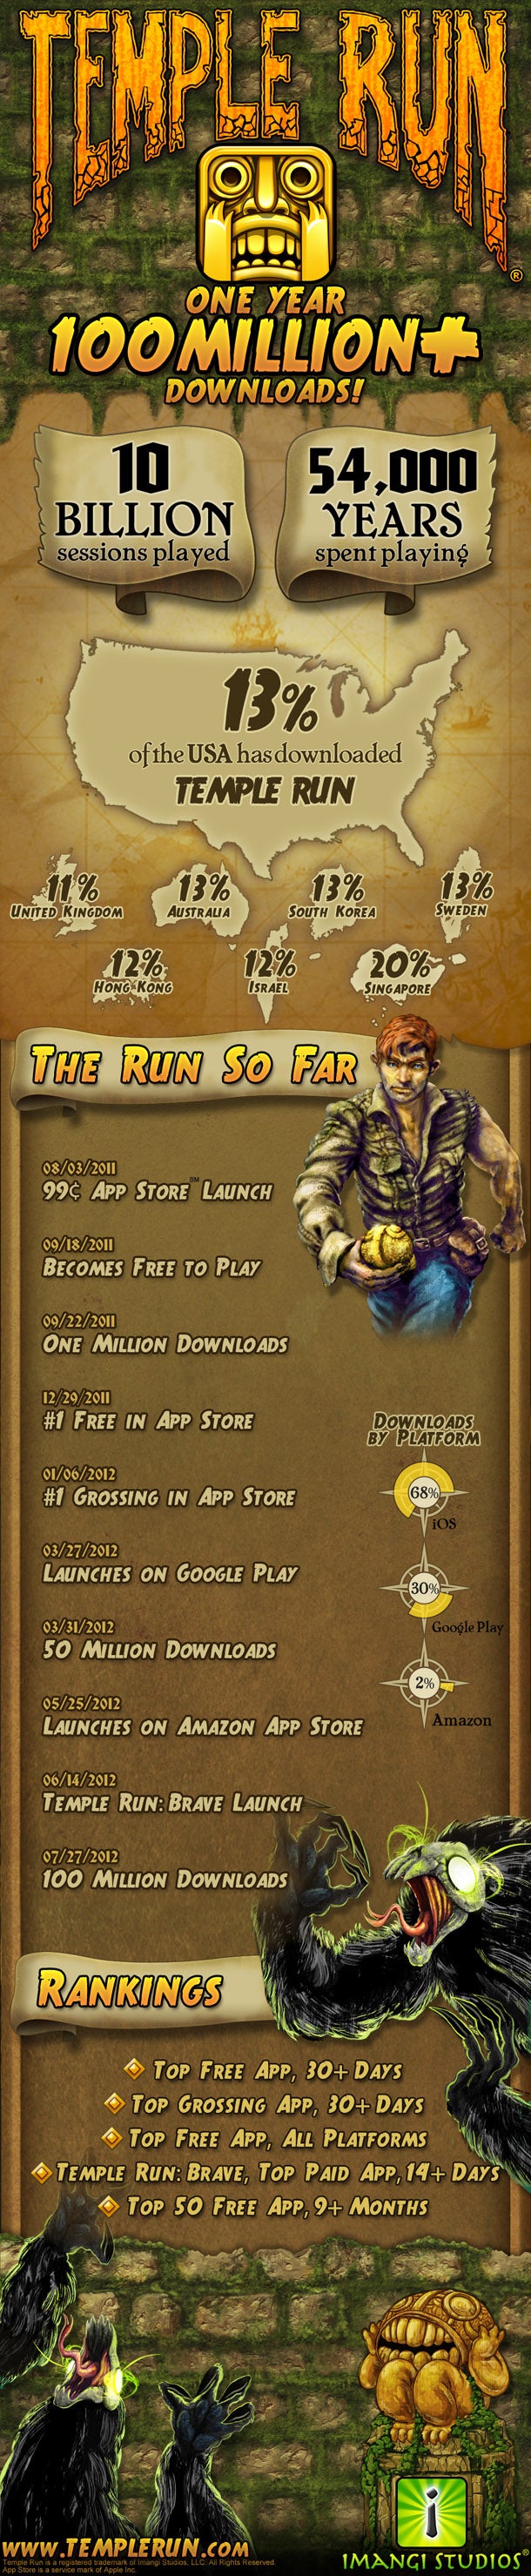 Temple Run passes 100 million downloads, celebrates with infographic